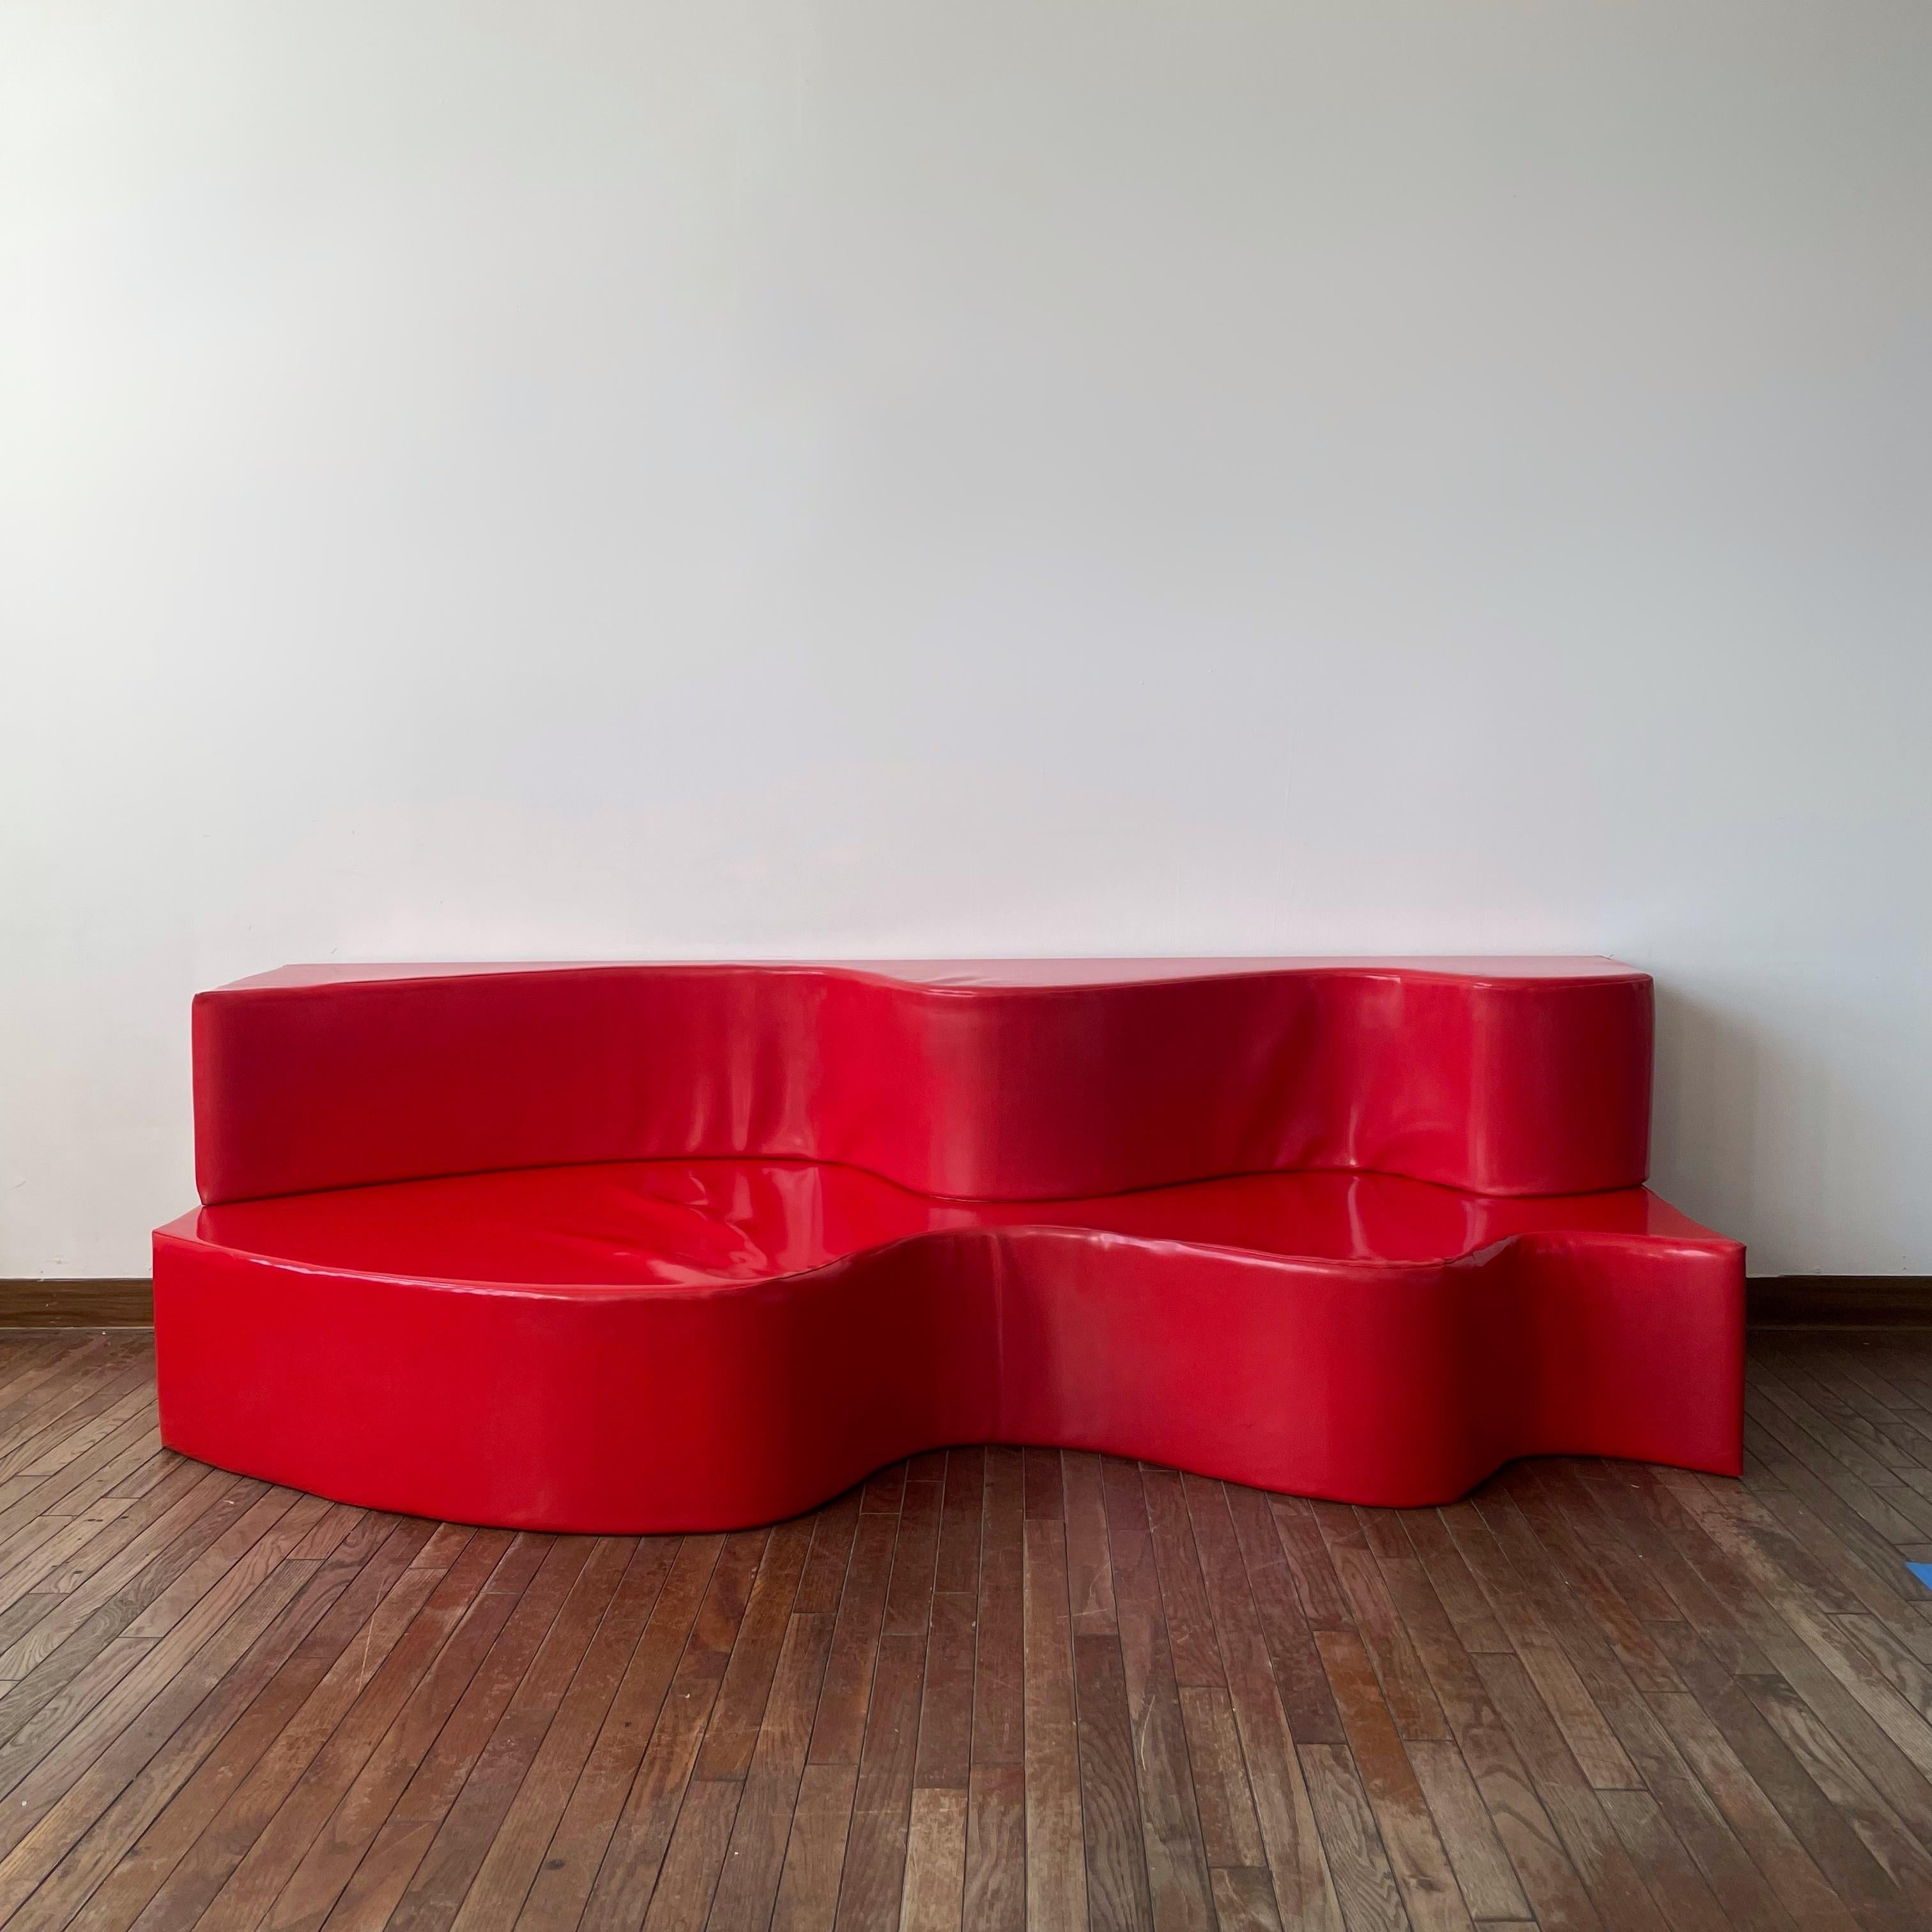 Italy, 1967.  Original red vinyl upholstery. This particular piece comes from the Walker Art Center’s 2016 exhibit, Hippie Modernism: the Struggle for Utopia. 

“Designed in 1967 by the Italian radical design group Archizoom, this was the first sofa